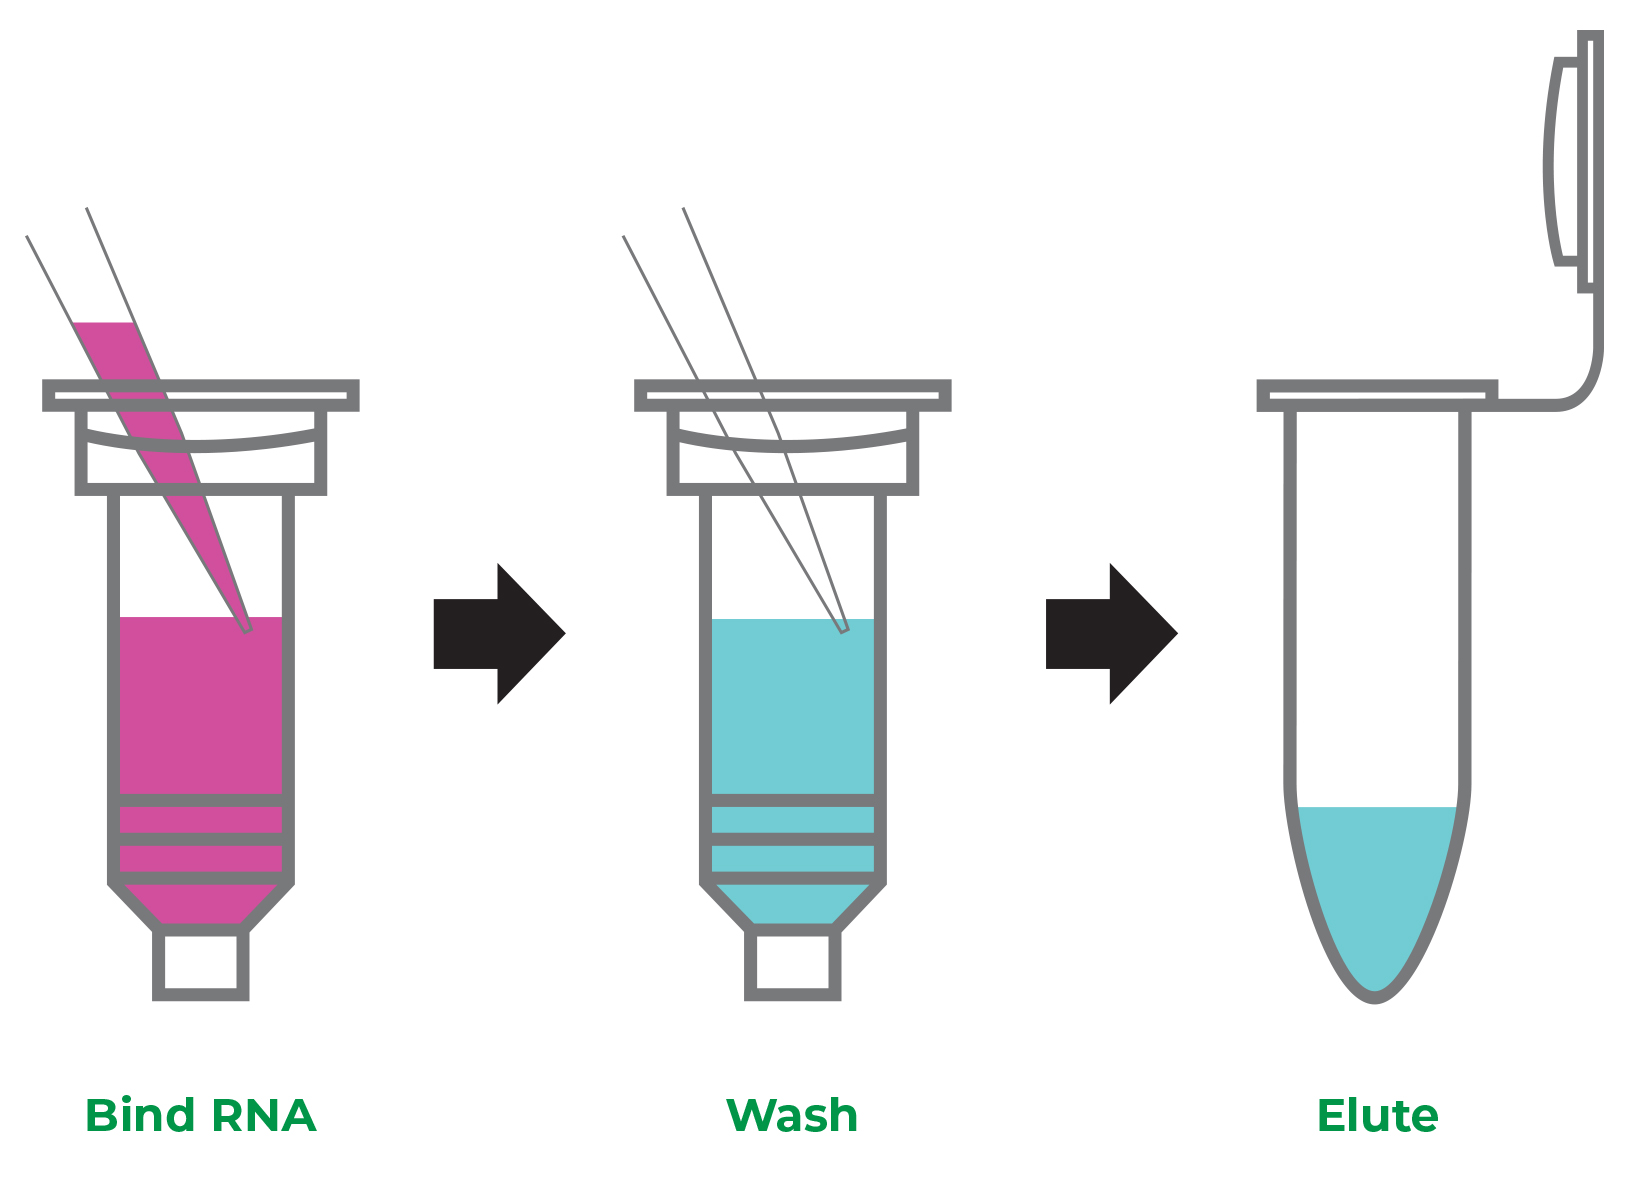 No more precision pipetting. With Direct-zol, just bind, wash, and elute the RNA.